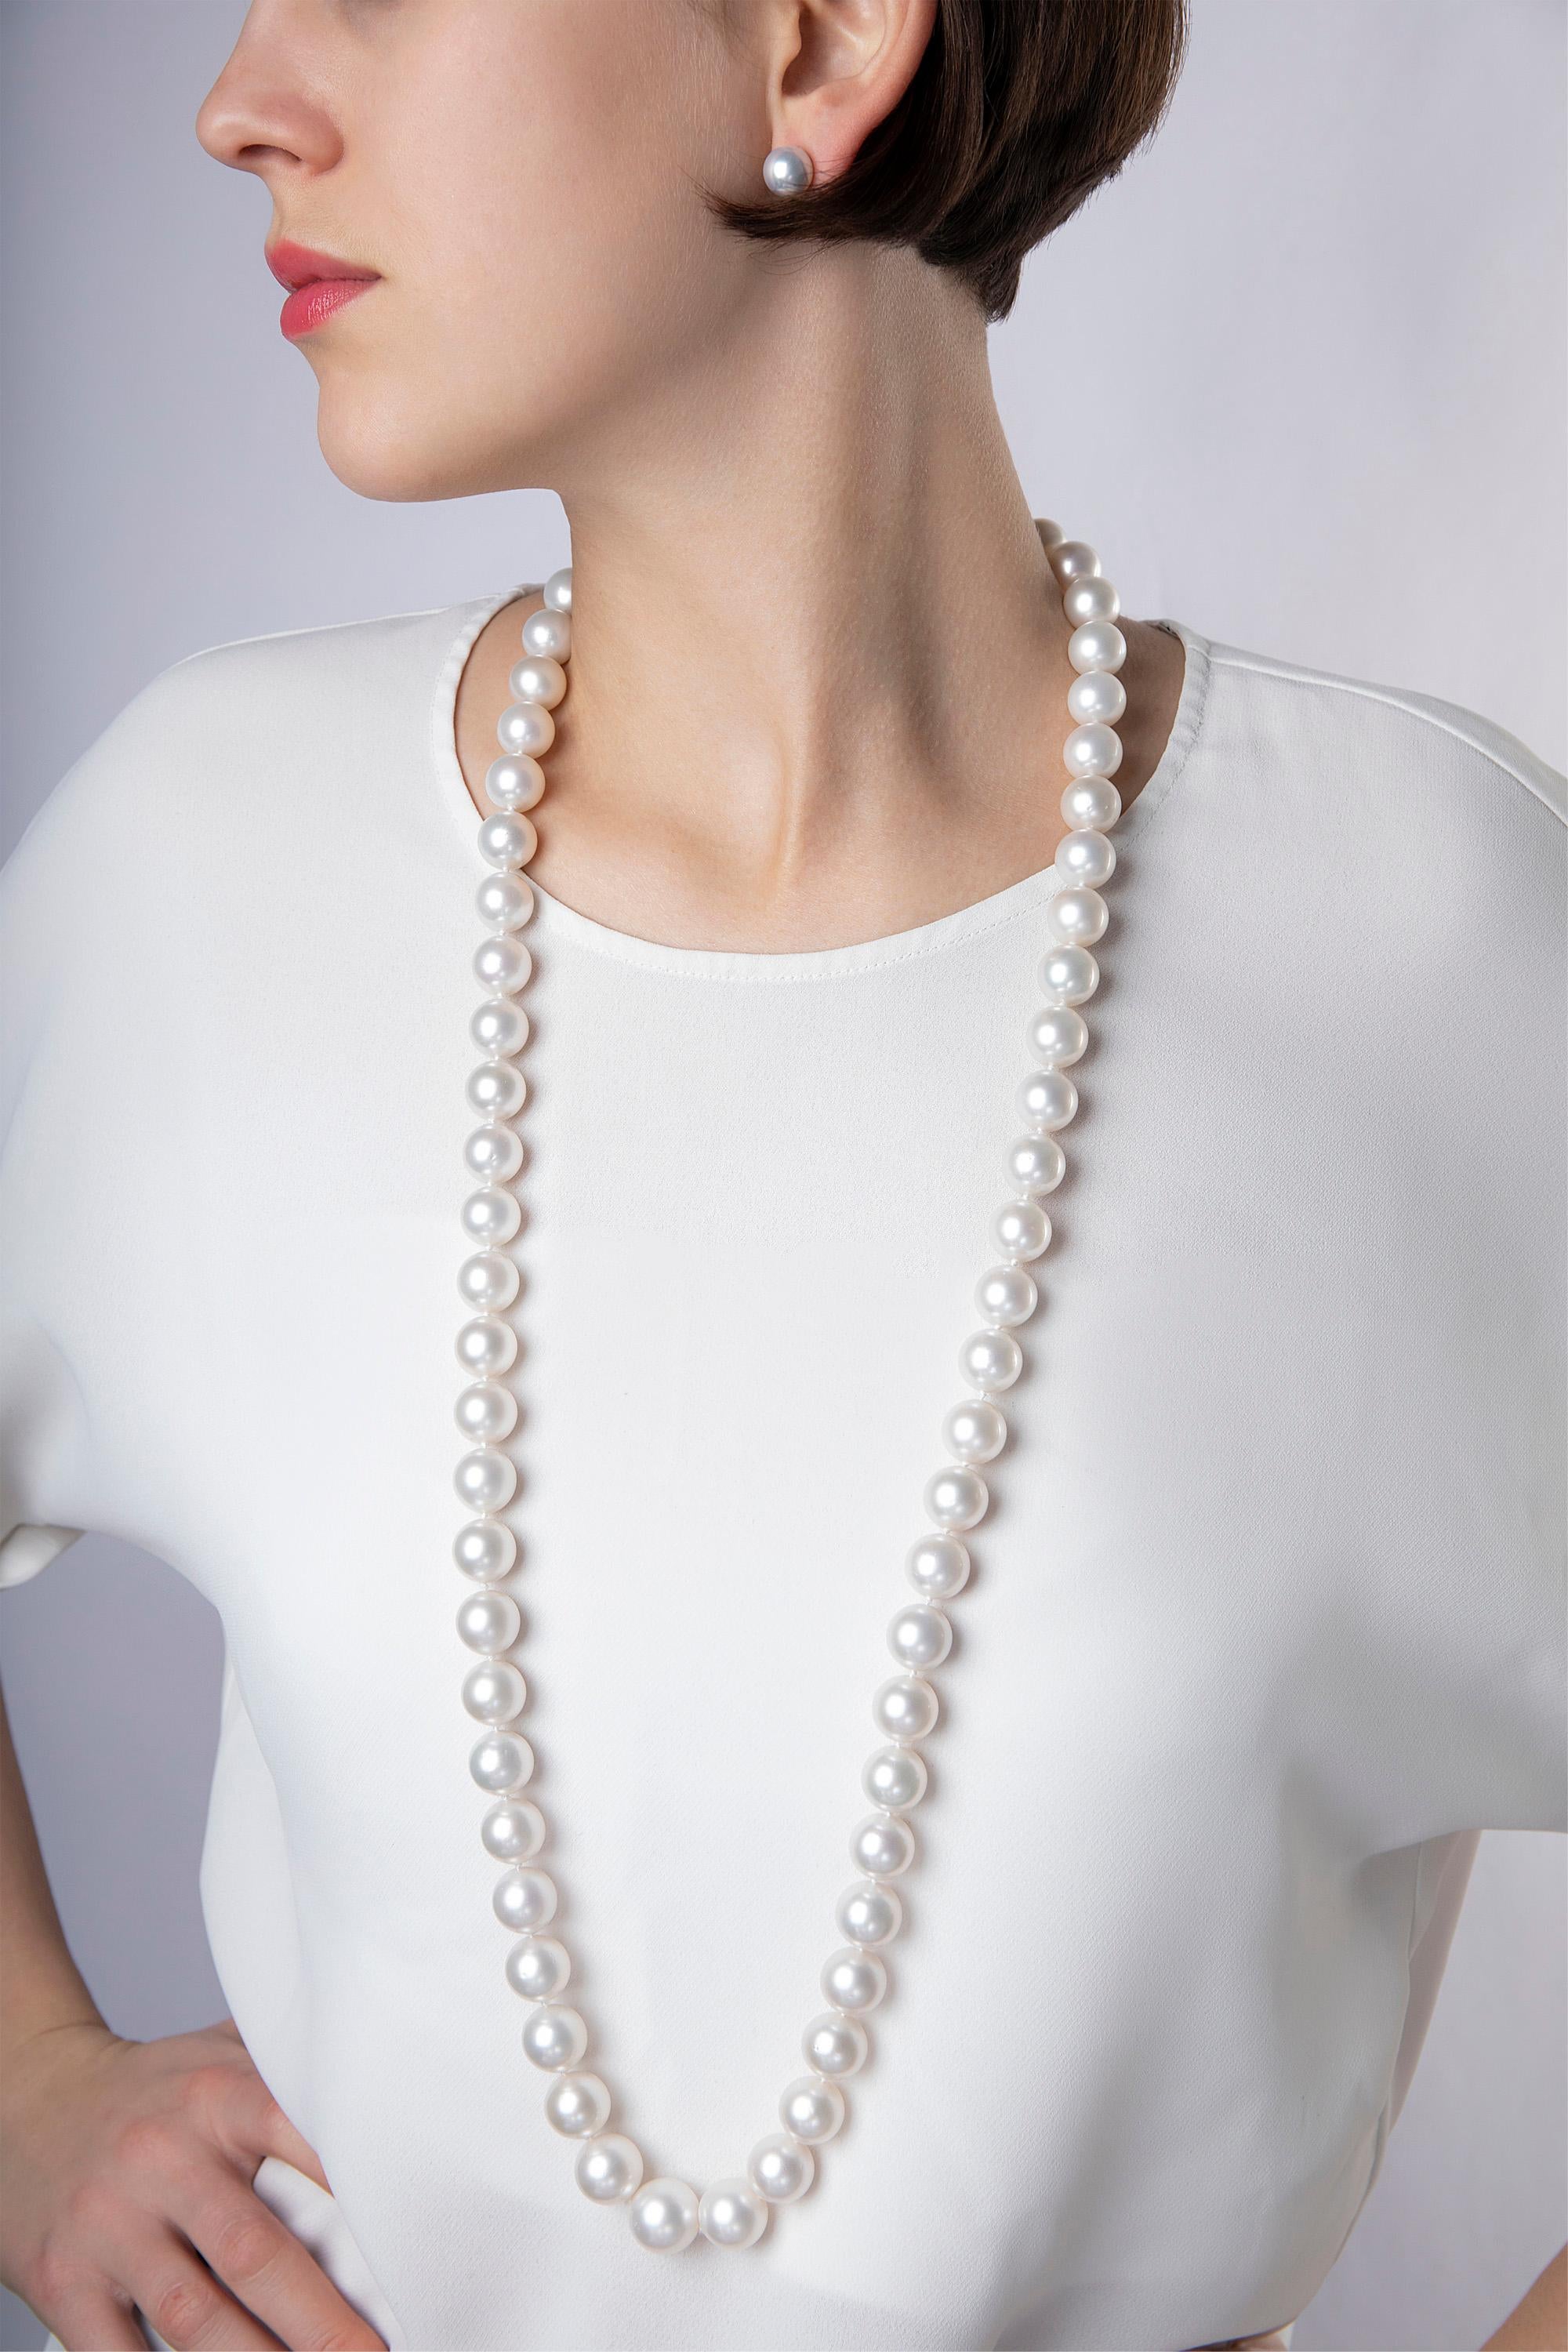 A bold statement piece for the ultimate pearl connoisseur, this long classic necklace by Yoko London features exceptional quality rare South Sea Pearls secured to an 18K White Gold Ball Clasp. Easy to style for any occasion, this showstopping piece